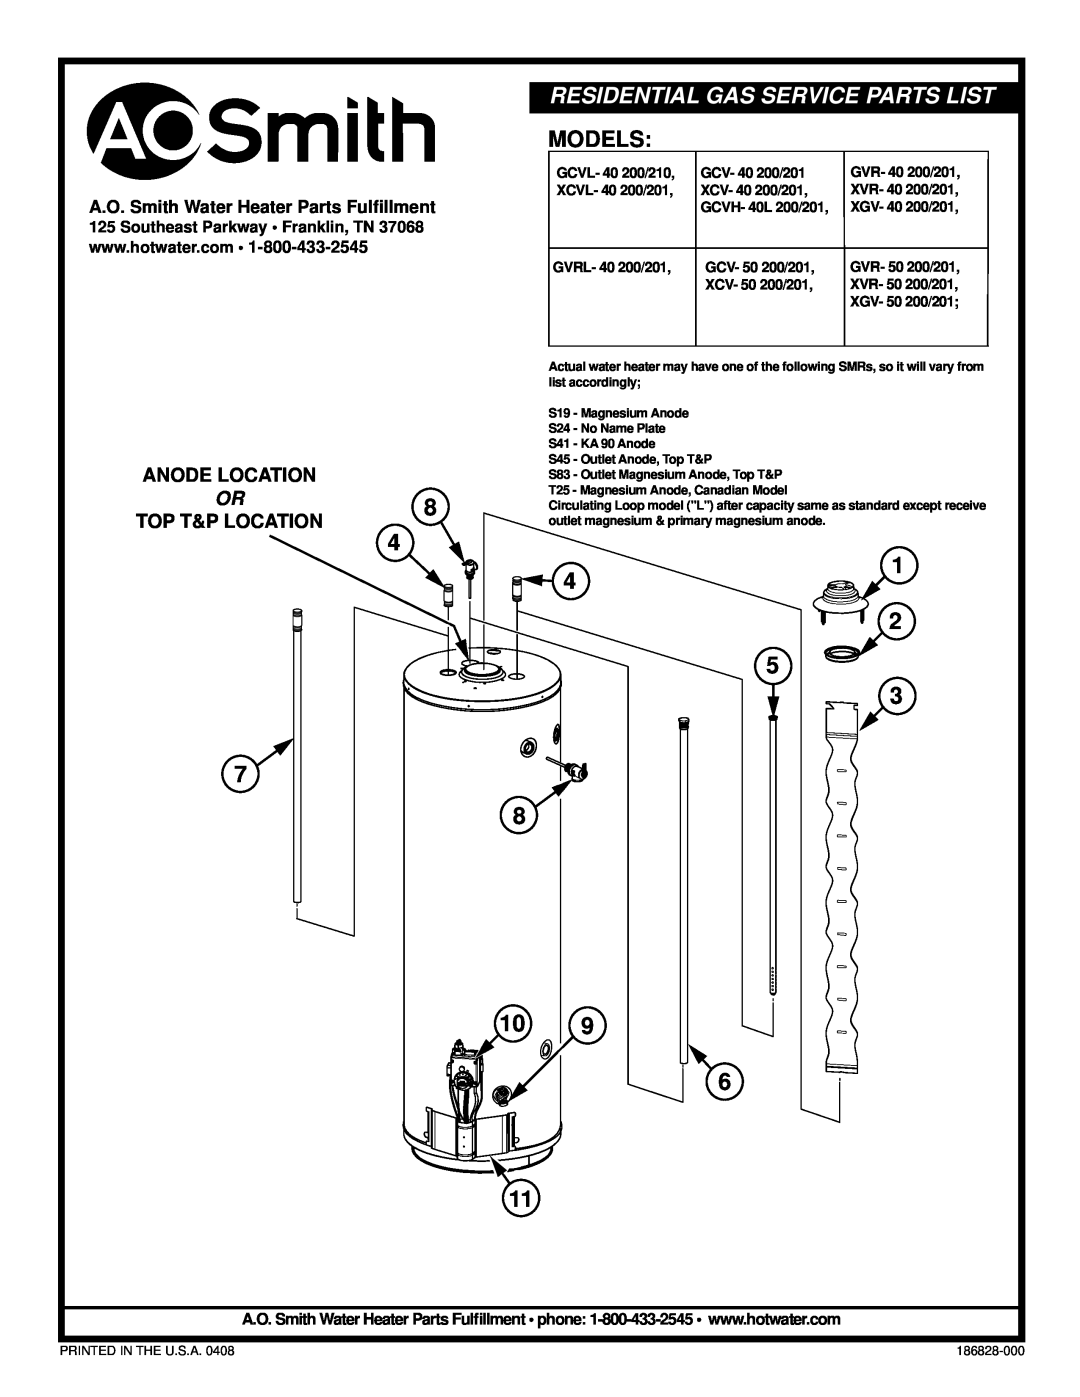 A.O. Smith XCVL-40 200/201, XVR-40 200/201 manual Residential Gas Service Parts List, ANODE LOCATION OR8 TOP T&P LOCATION 